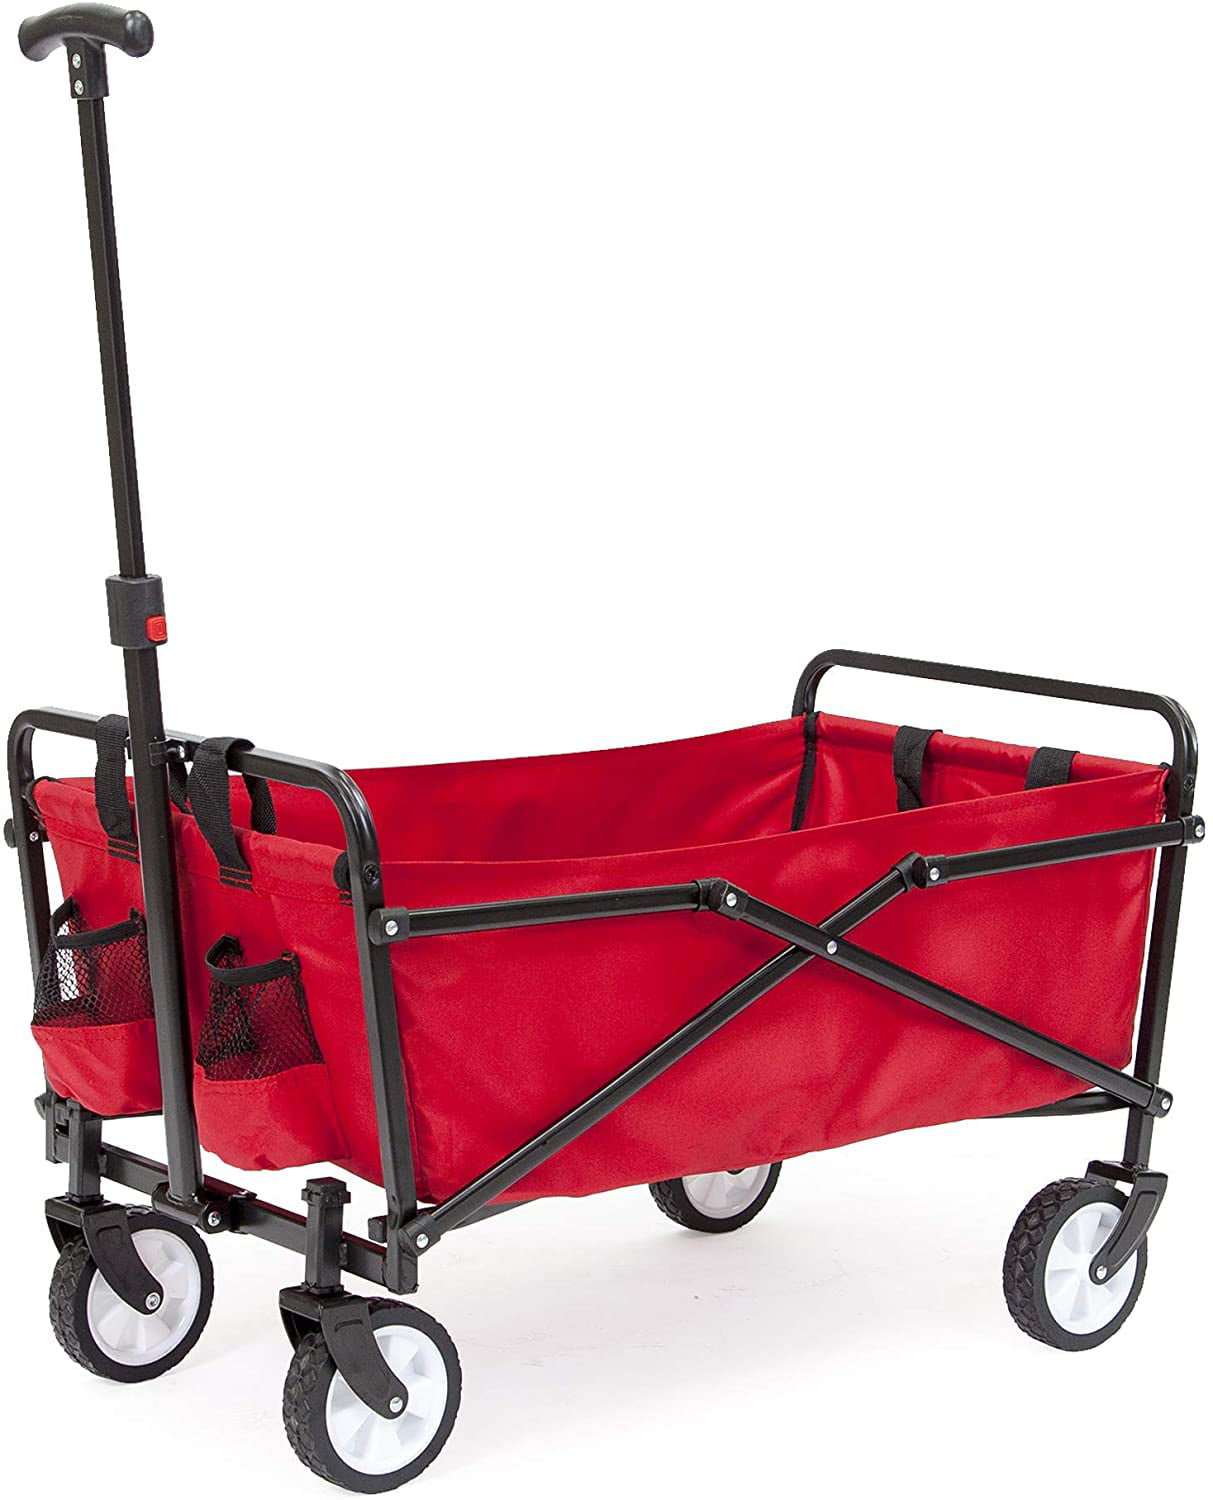 Seina Collapsible Folding Wagon with Straps | Utility Cart， Portable， Lightweight， Fold up， for Groceries， Laundry， Sports， Baseball， Softball， Fishing and Camping